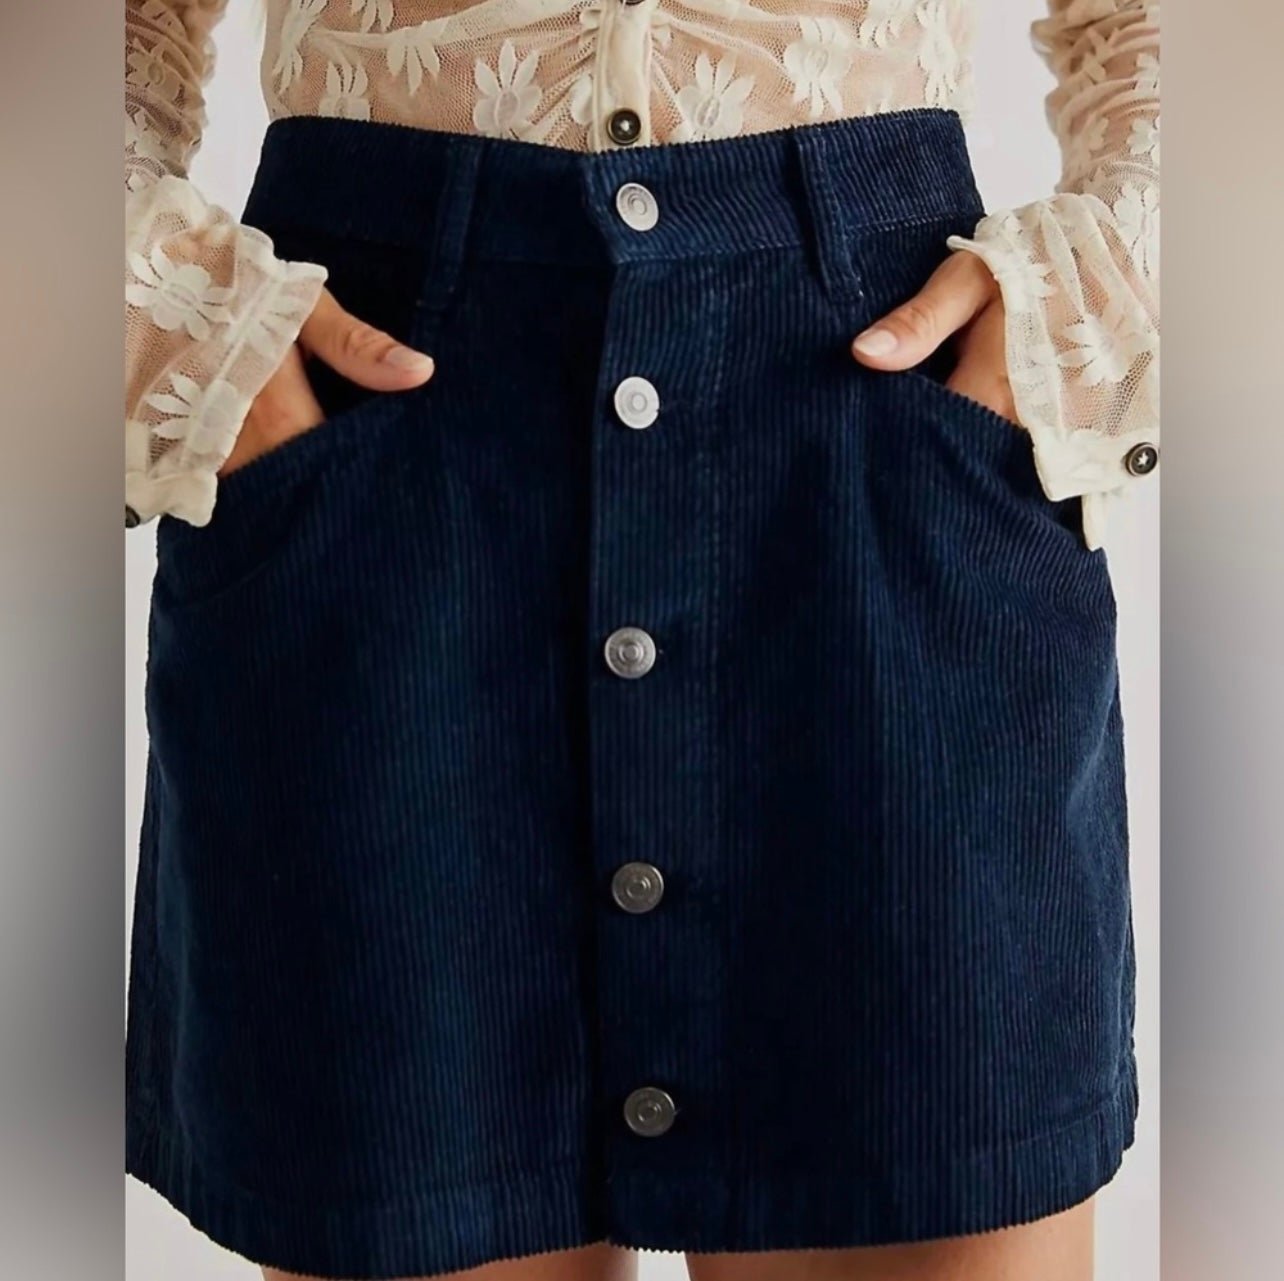 Authentic NWT Free People Ray Corduroy Mini Skirt - size 8 H3iw7DkOl Cheap